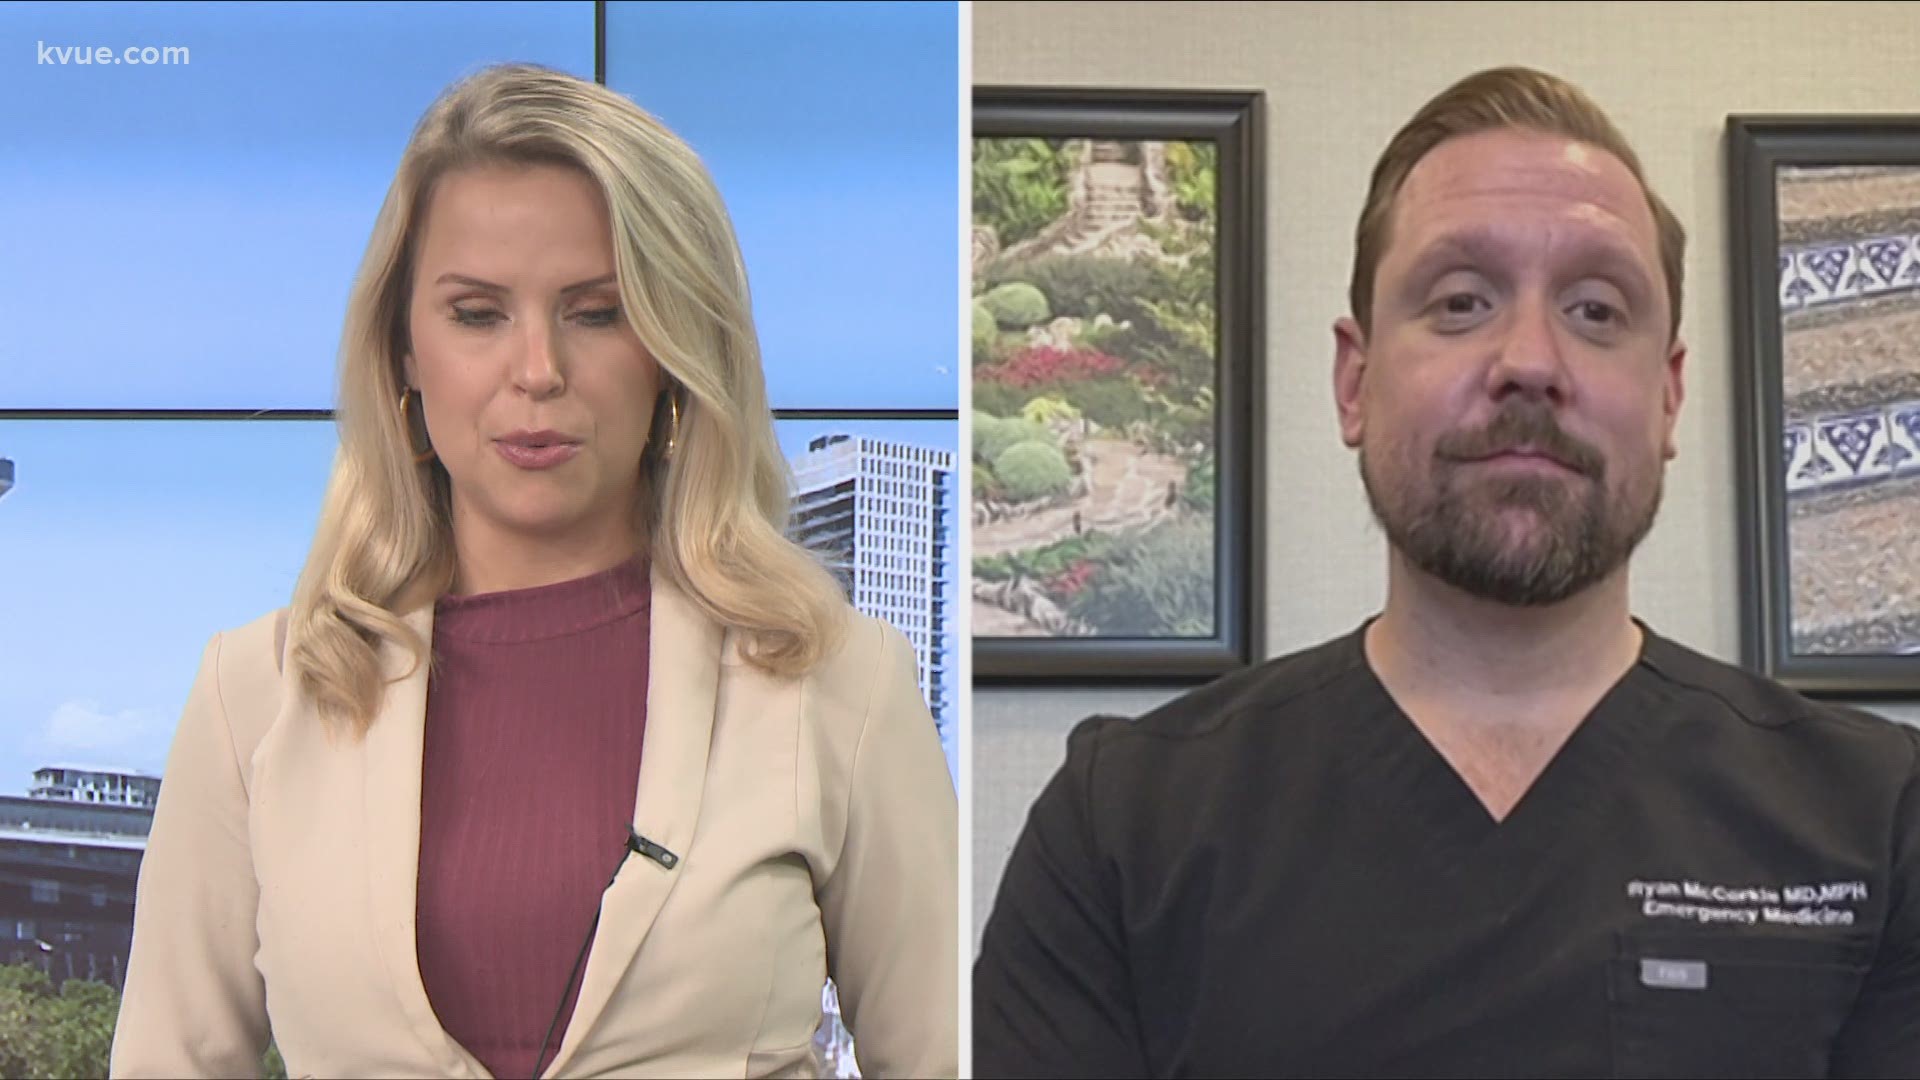 Emergency Medicine Physician at St. David's Medical Center Dr. Ryan McCorkle joined KVUE to talk about the differences.